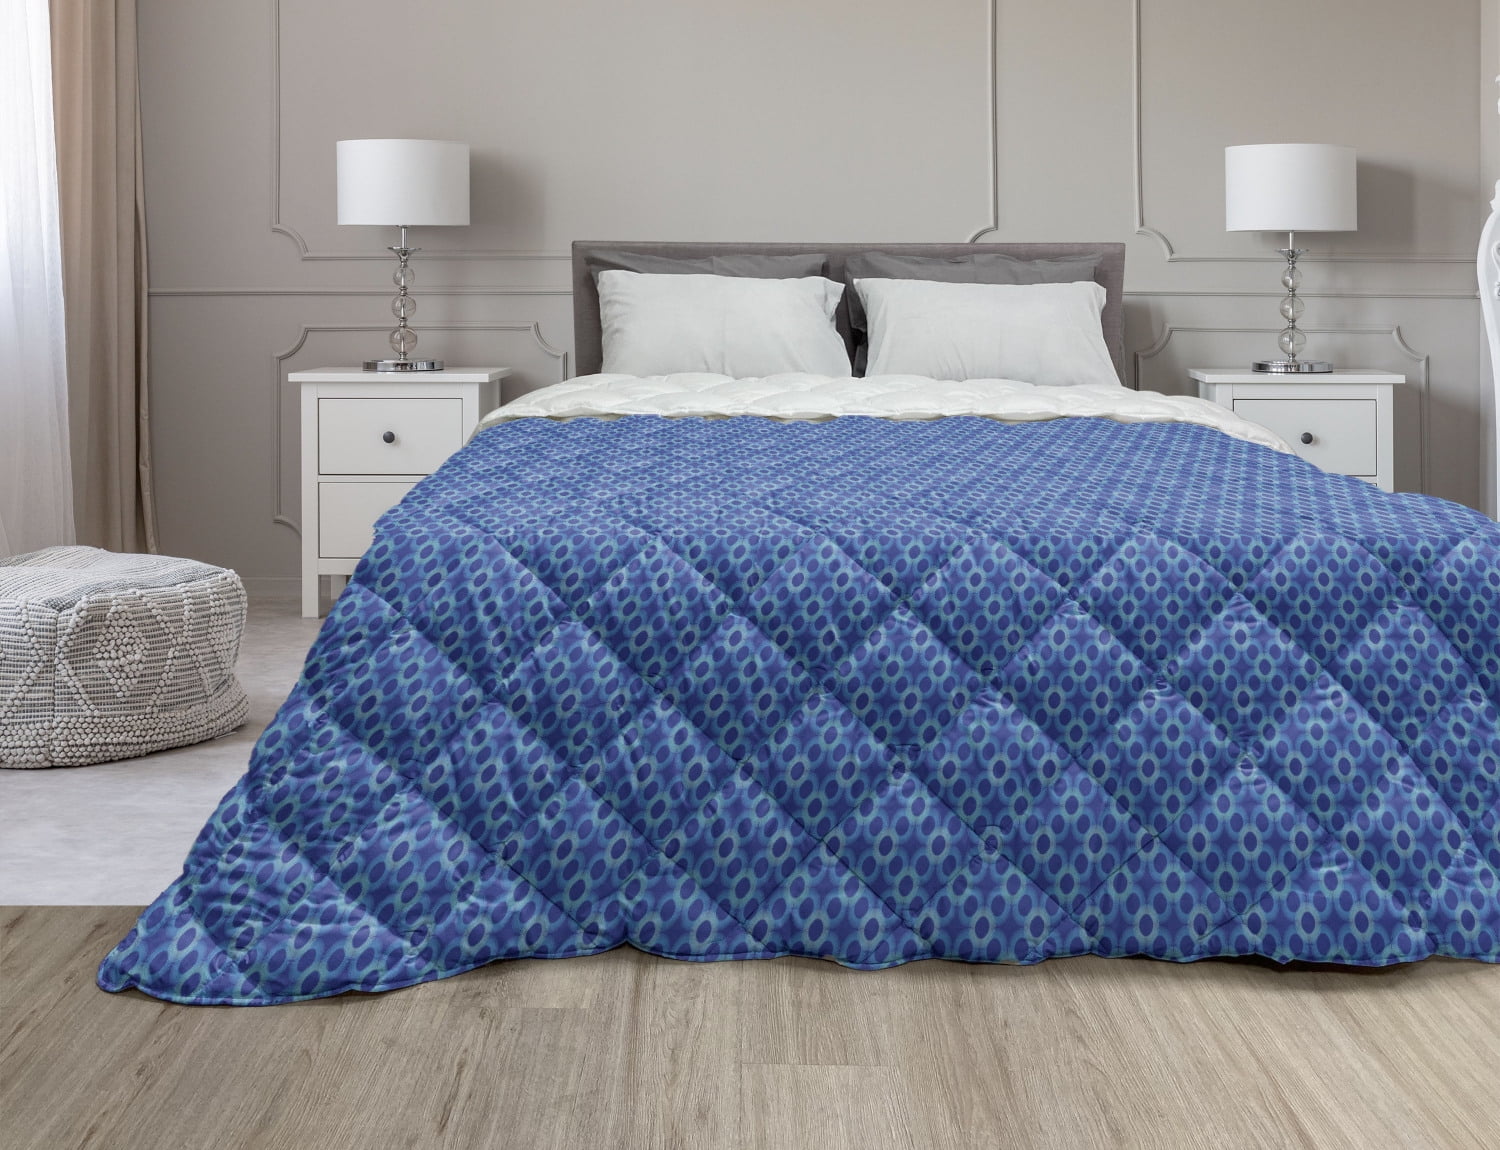 Details about   HOMBYS Down Alternative Quilted Comforter Queen Size Queen Down Alternative Com 